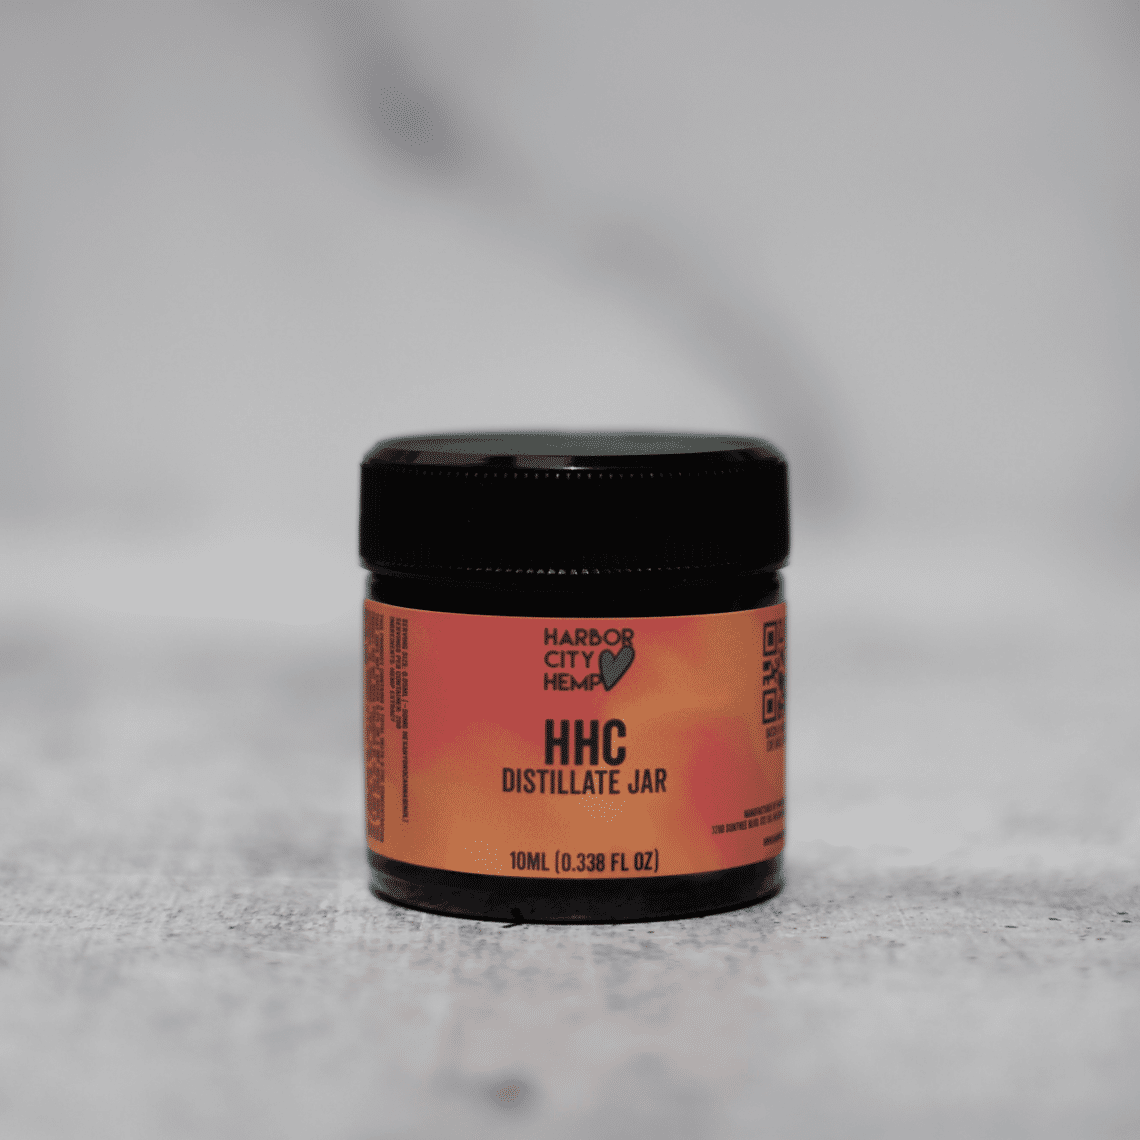 benefits of hhc distillate cover photo